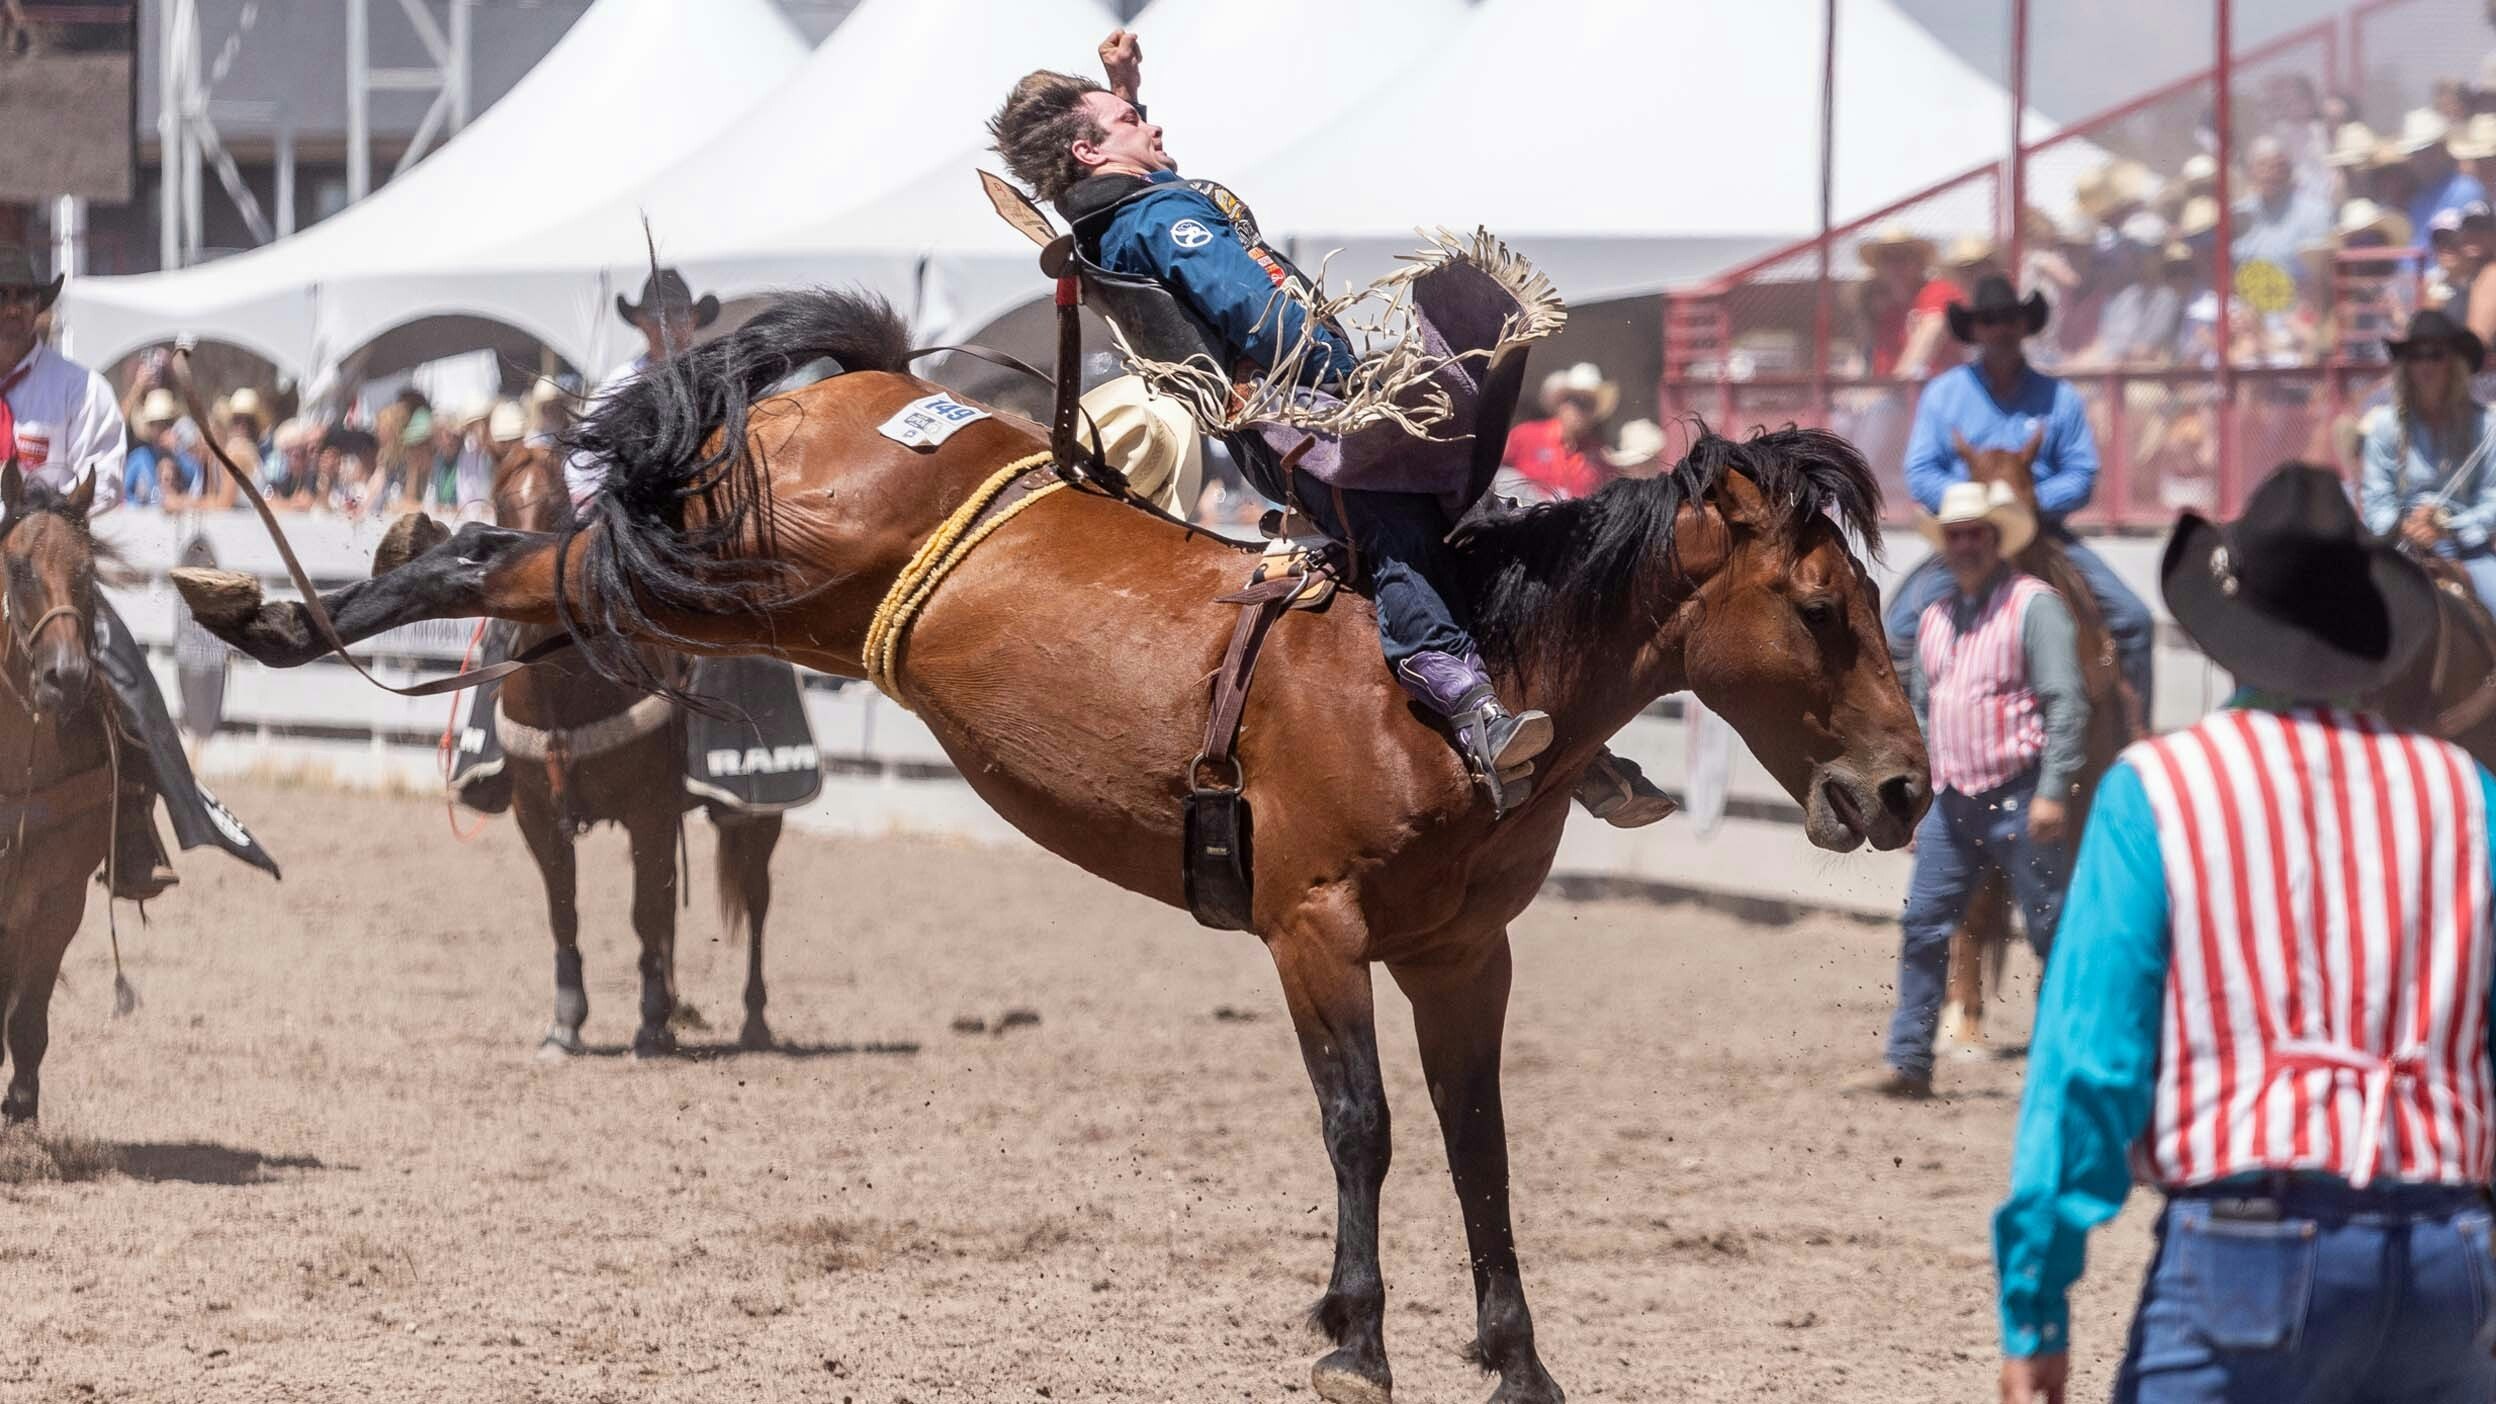 Cole Reiner from Buffalo, WY scores 87.50 in the Bareback Riding at Cheyenne Frontier Days on July 30, 2023. Cole won the CFD Champion Buckle, 3-way tie with Kade Sonner, and Clayton Biglow.